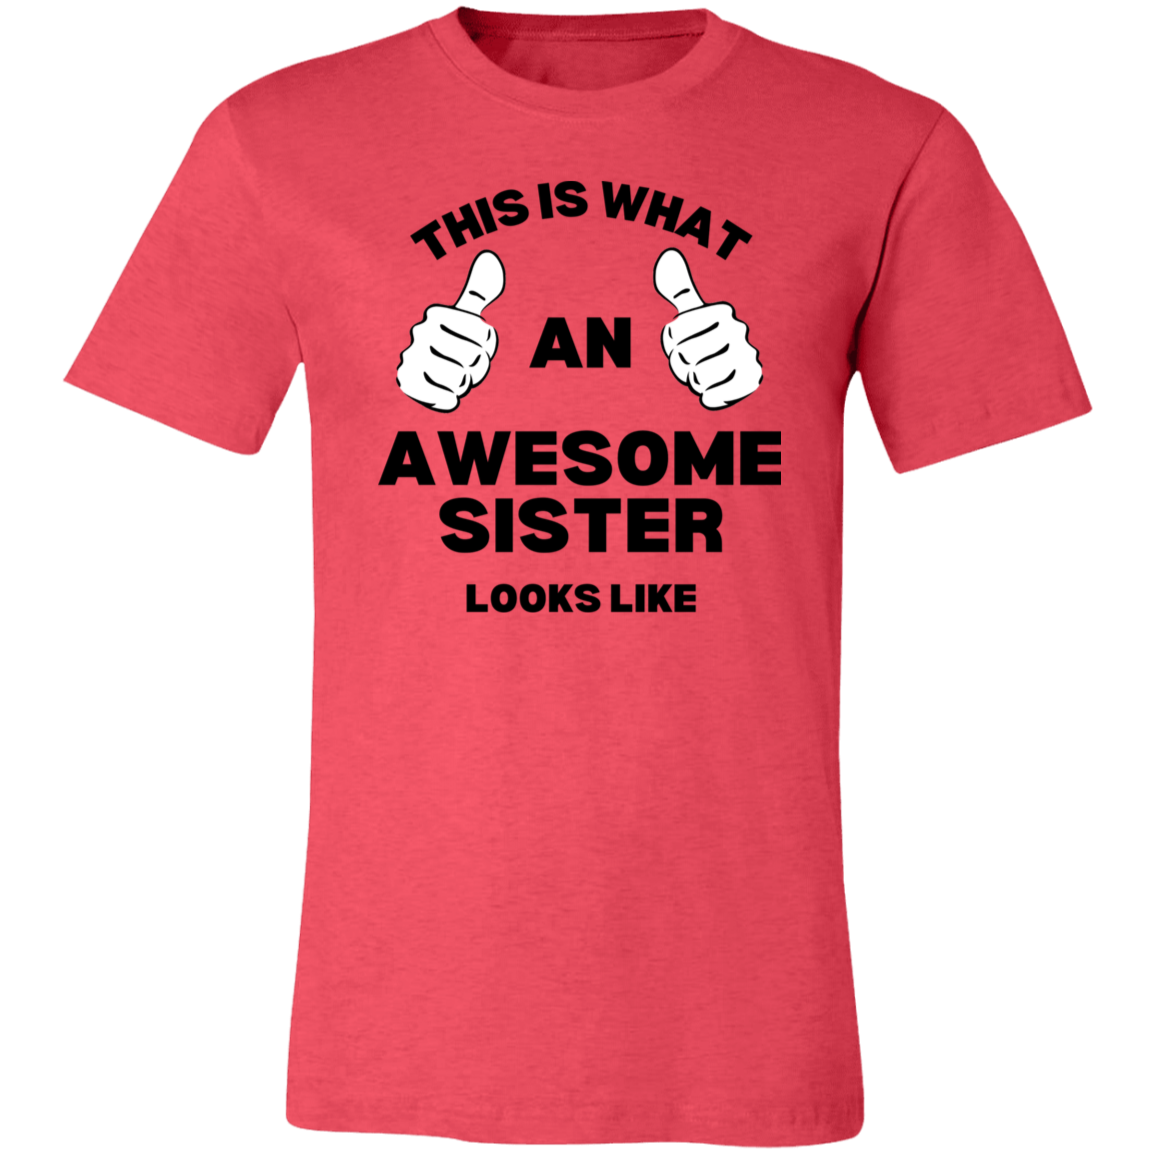 This Is What An Awesome Sister Looks Like T-Shirt (Adult)